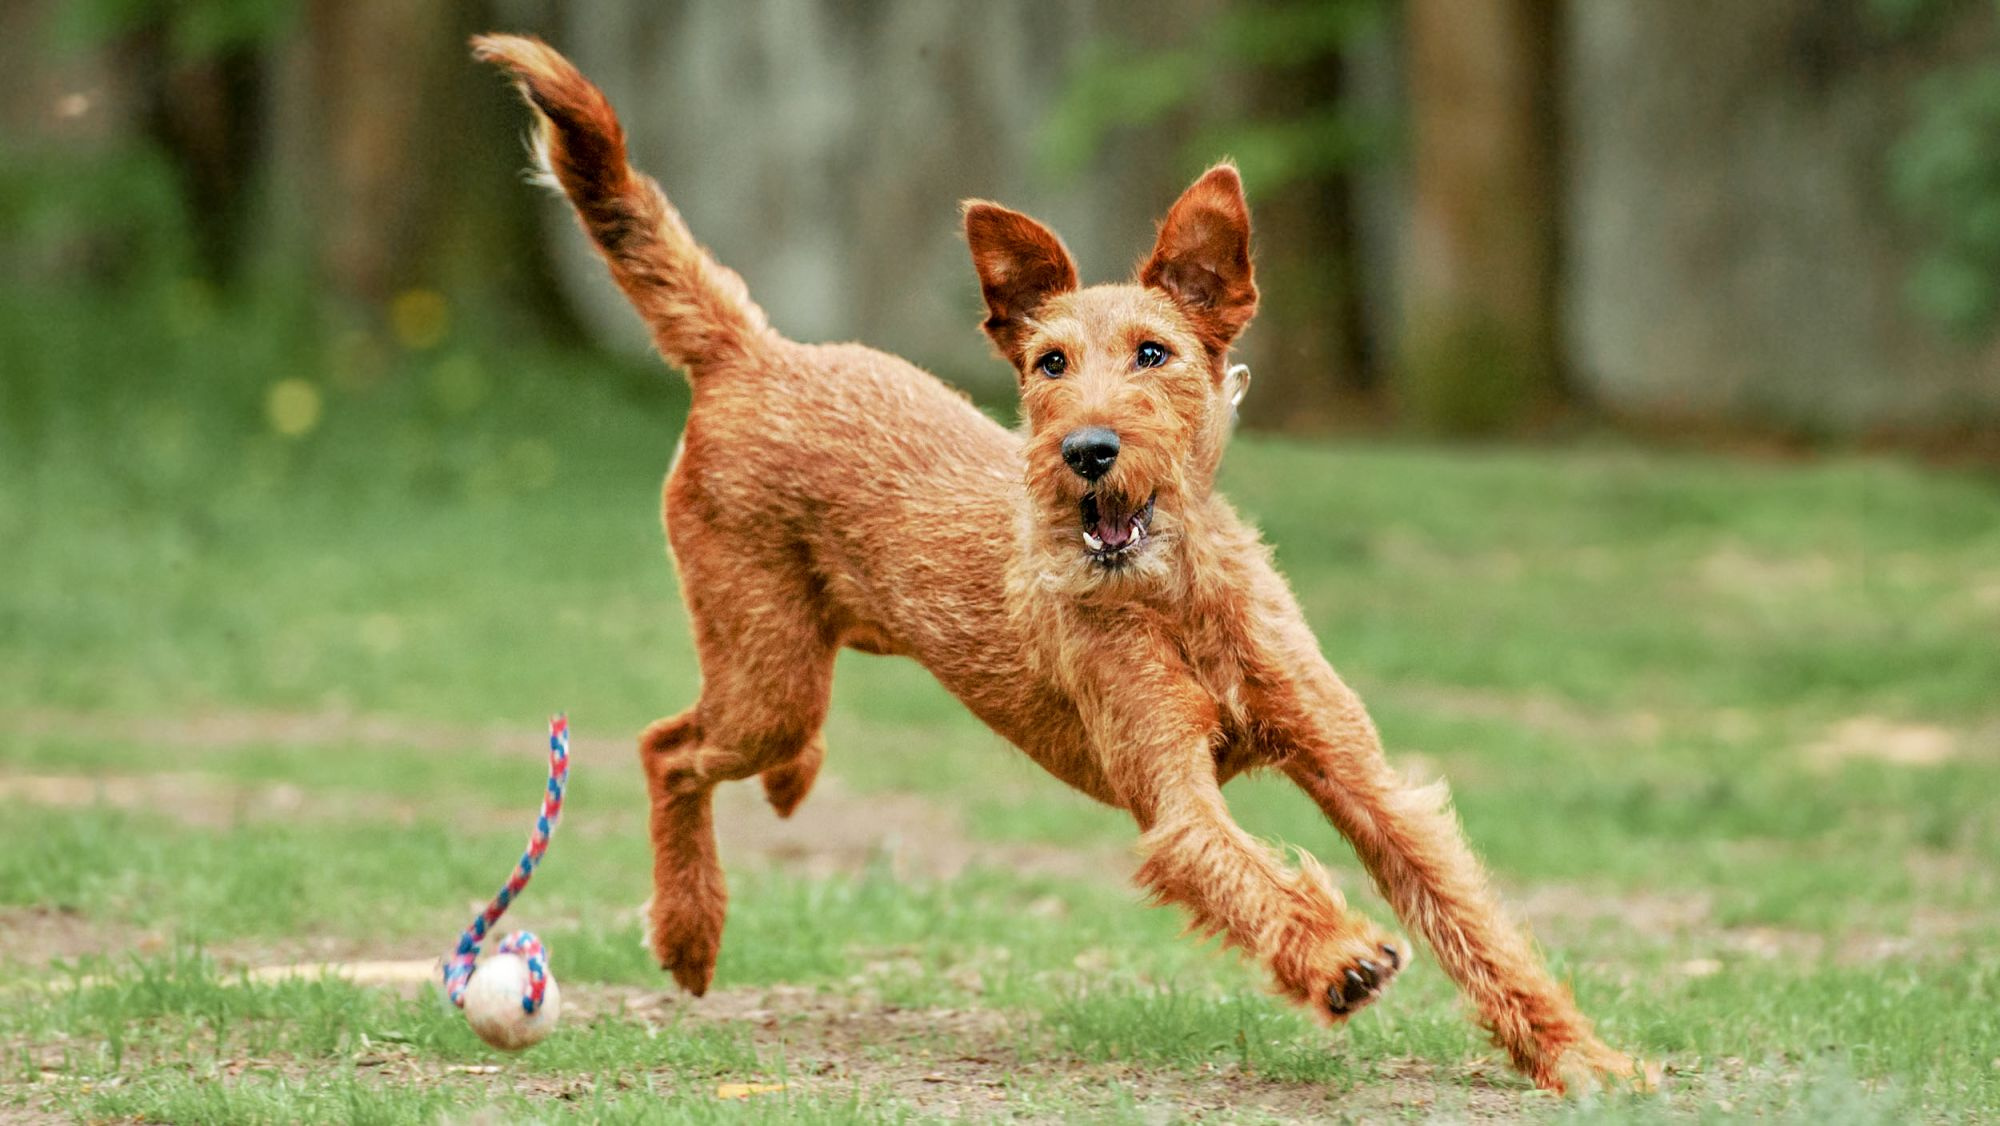 Adult Irish Terrier running in a garden with a toy.